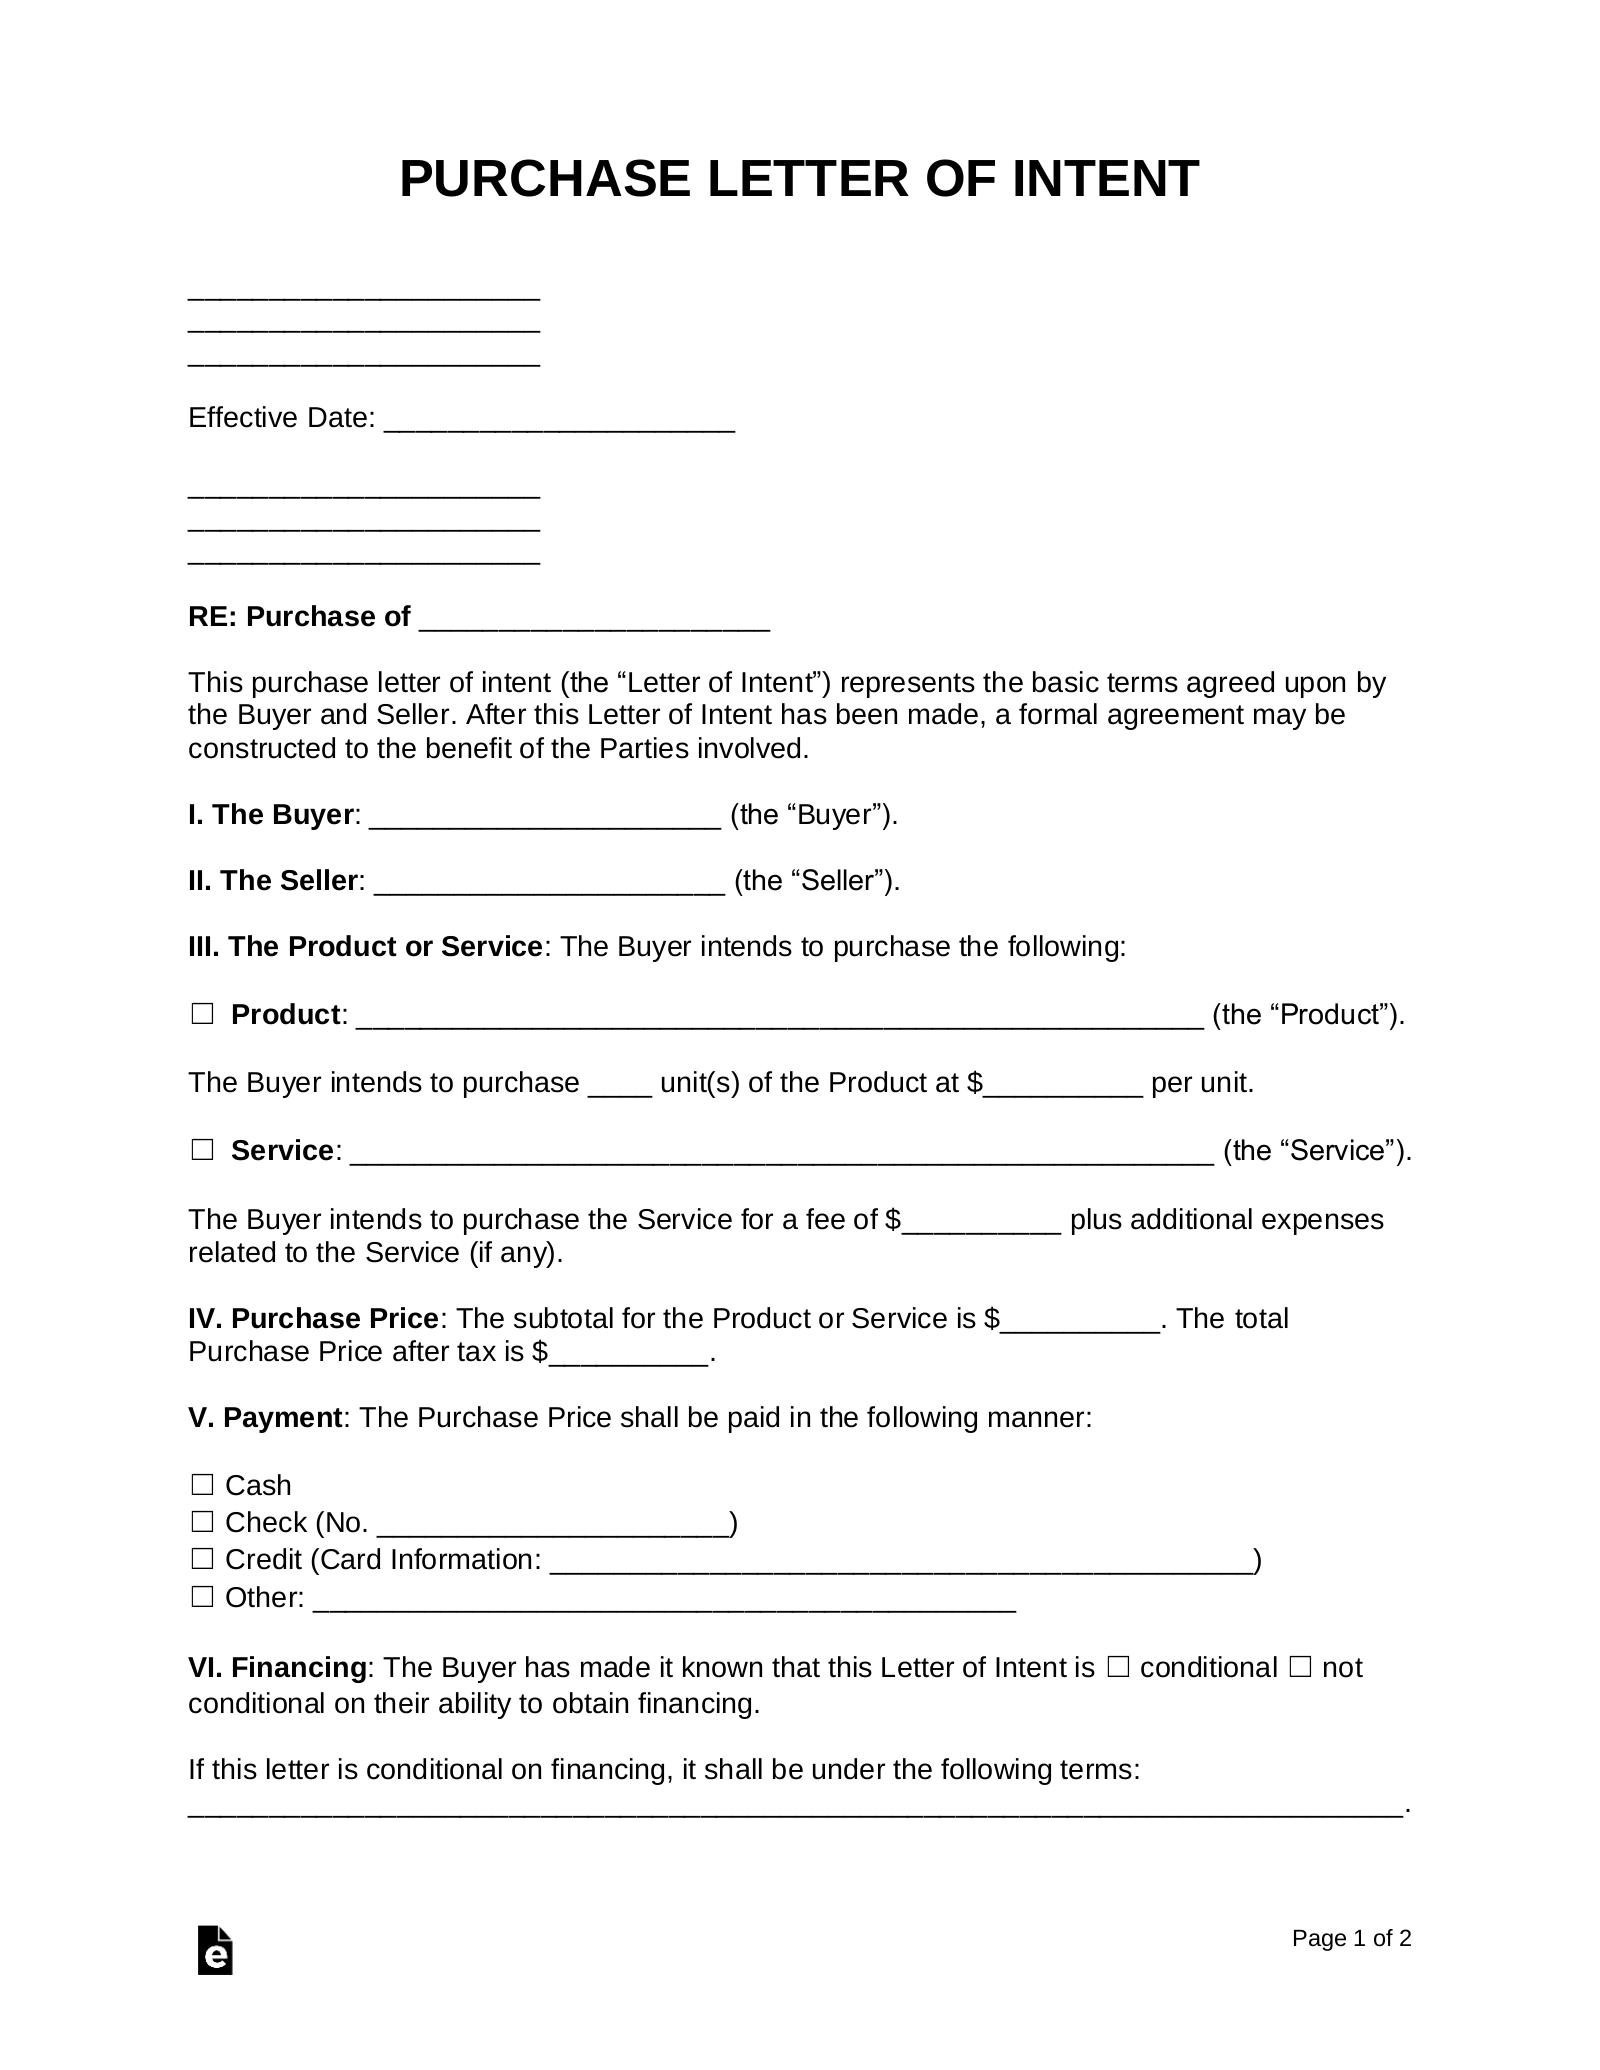 Sample Letter To Supplier For Purchase Order from eforms.com